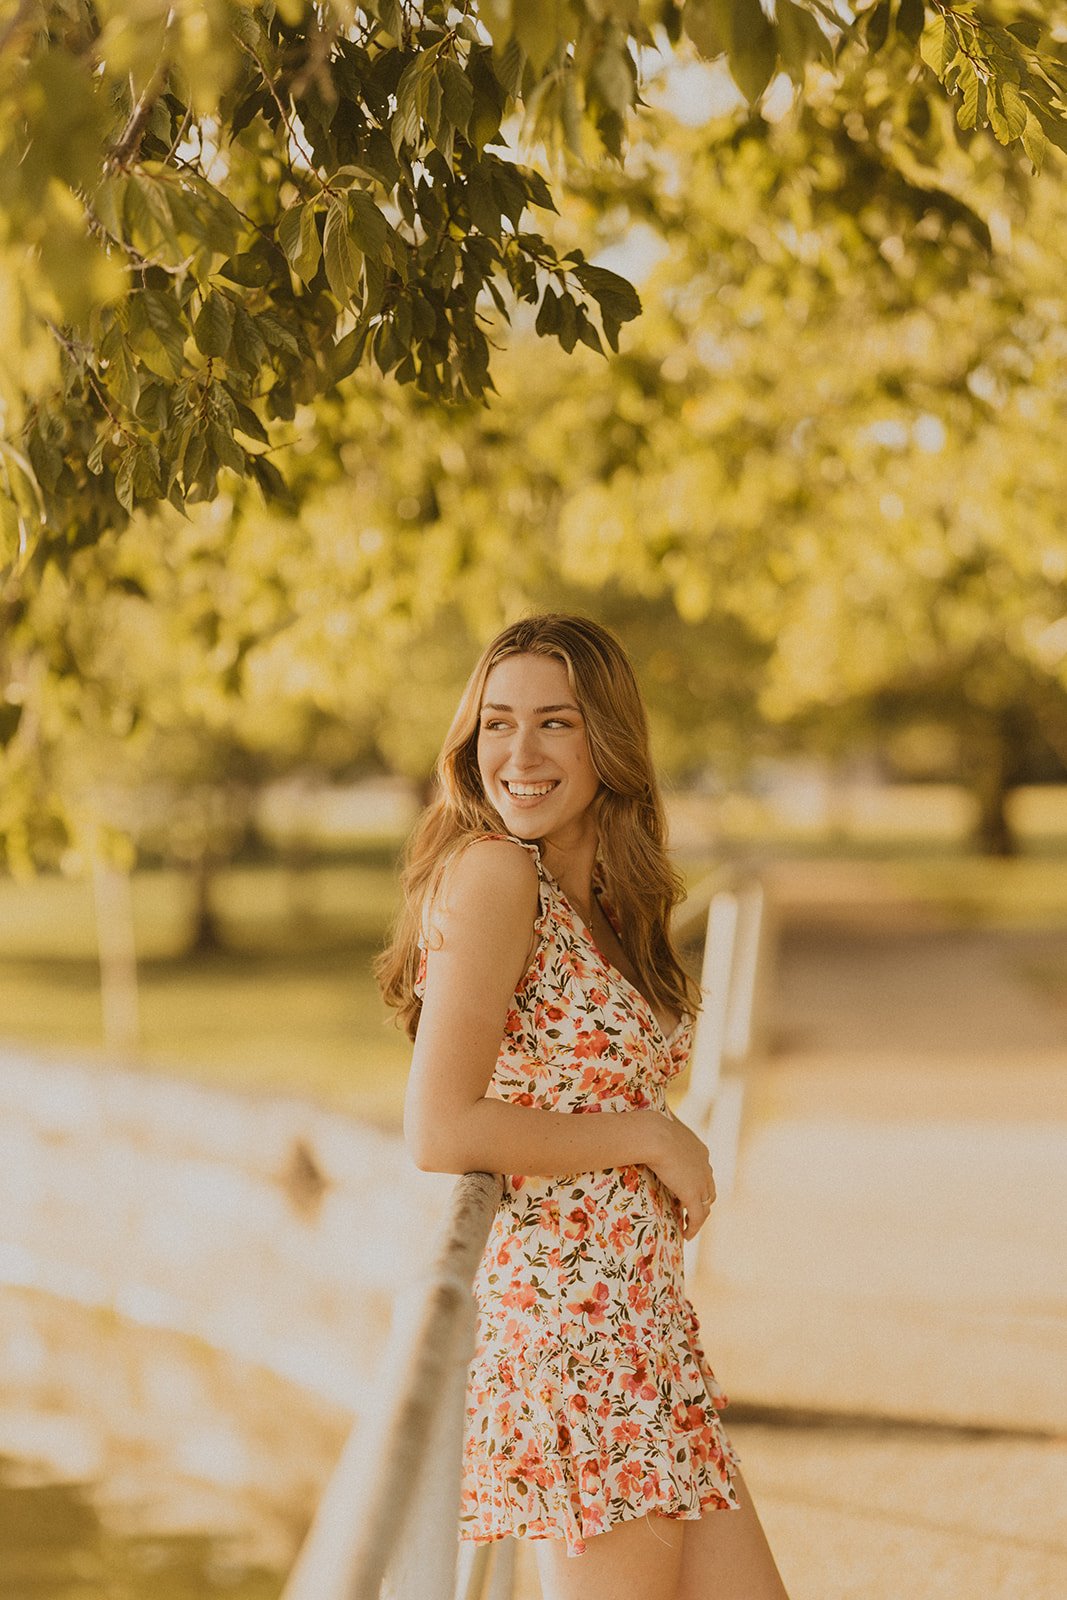 Senior Portraits at The National Mall in Washington, D.C.-24